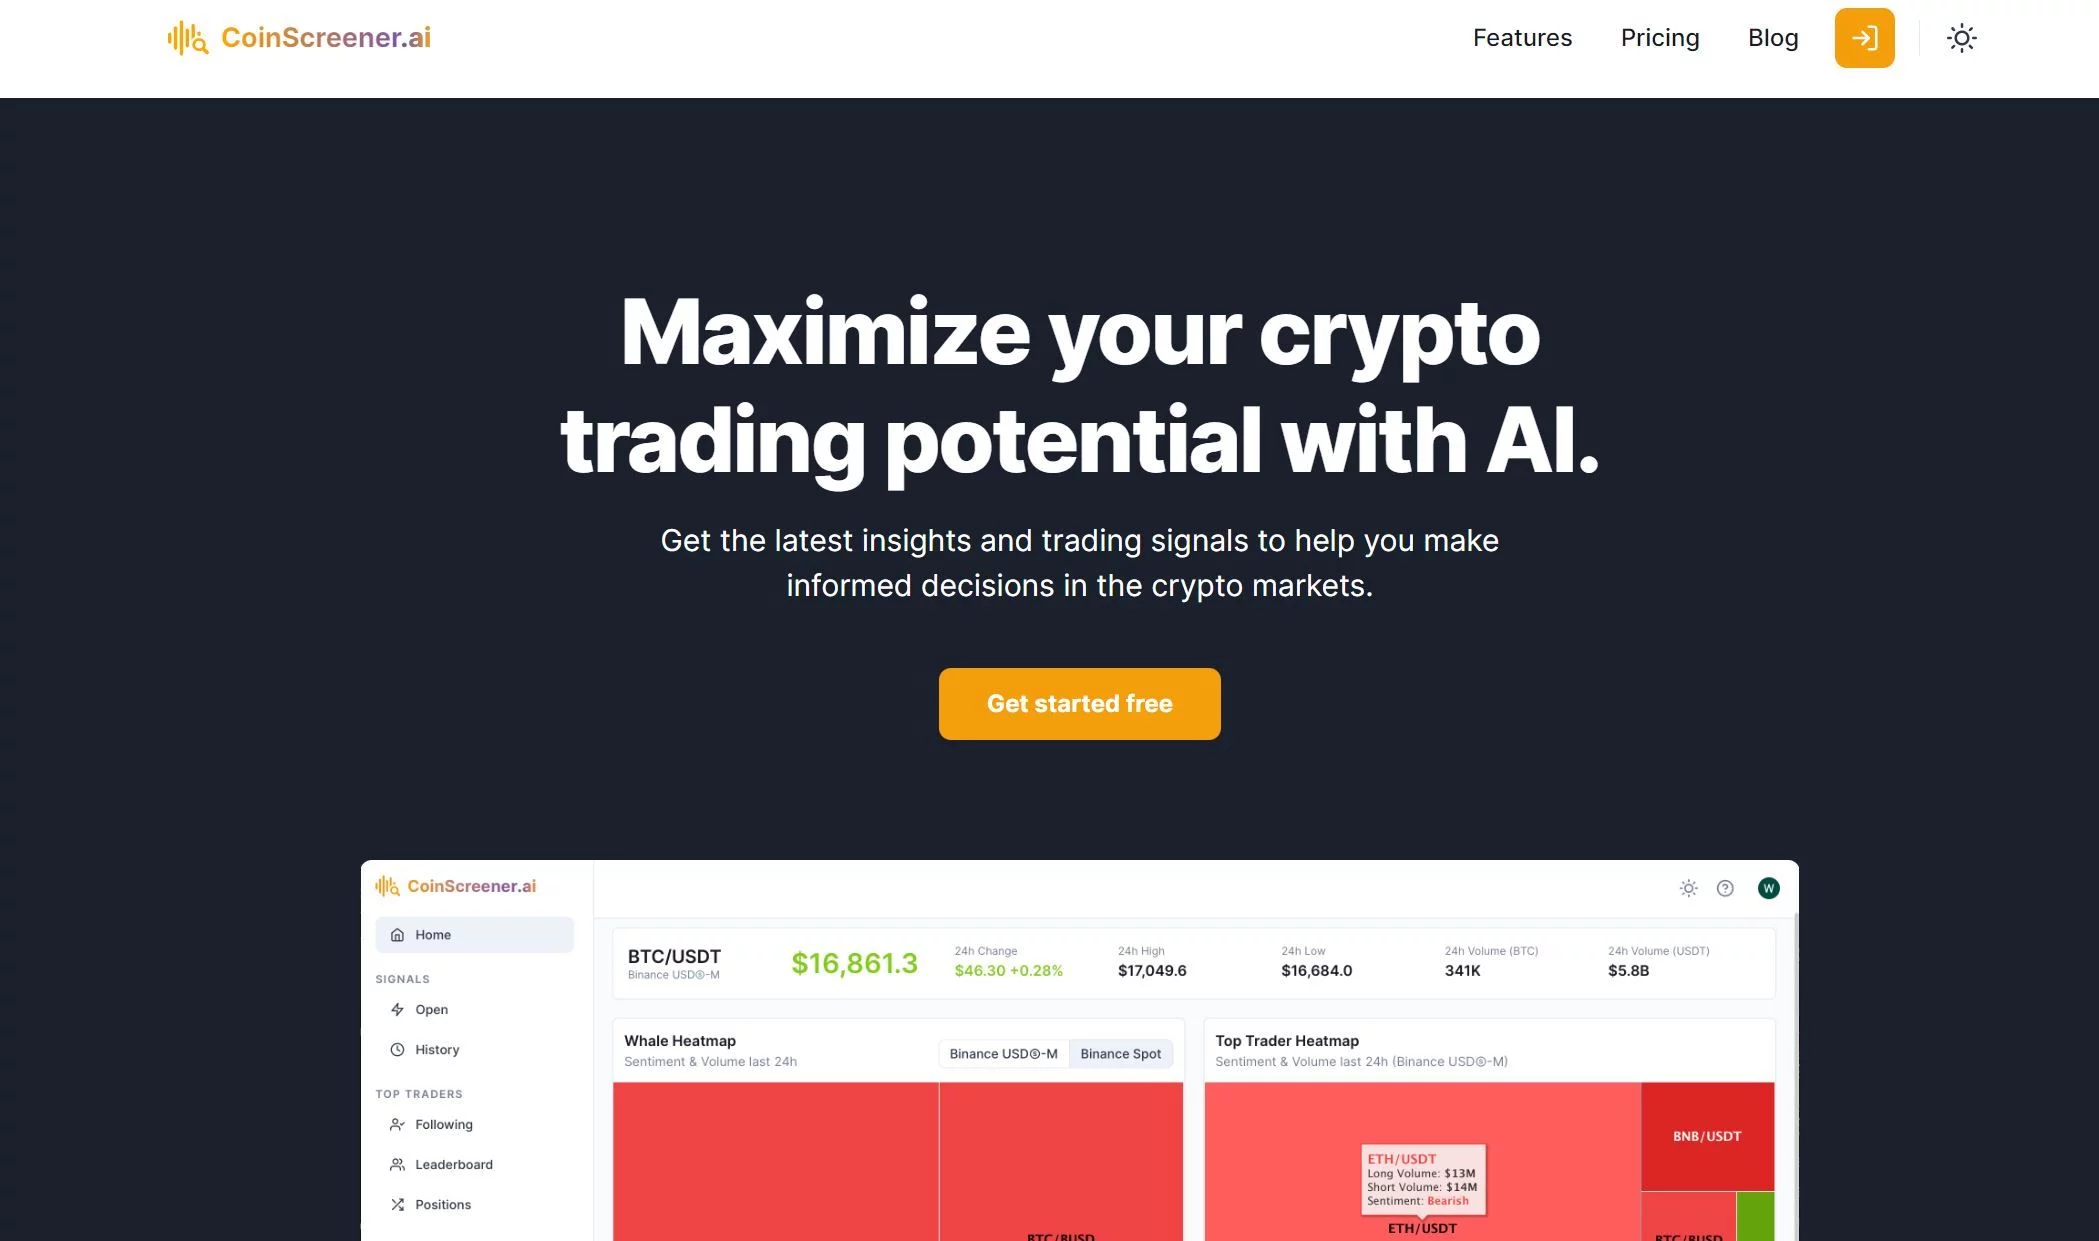  Comprehensive Crypto Trading Tool for Traders and